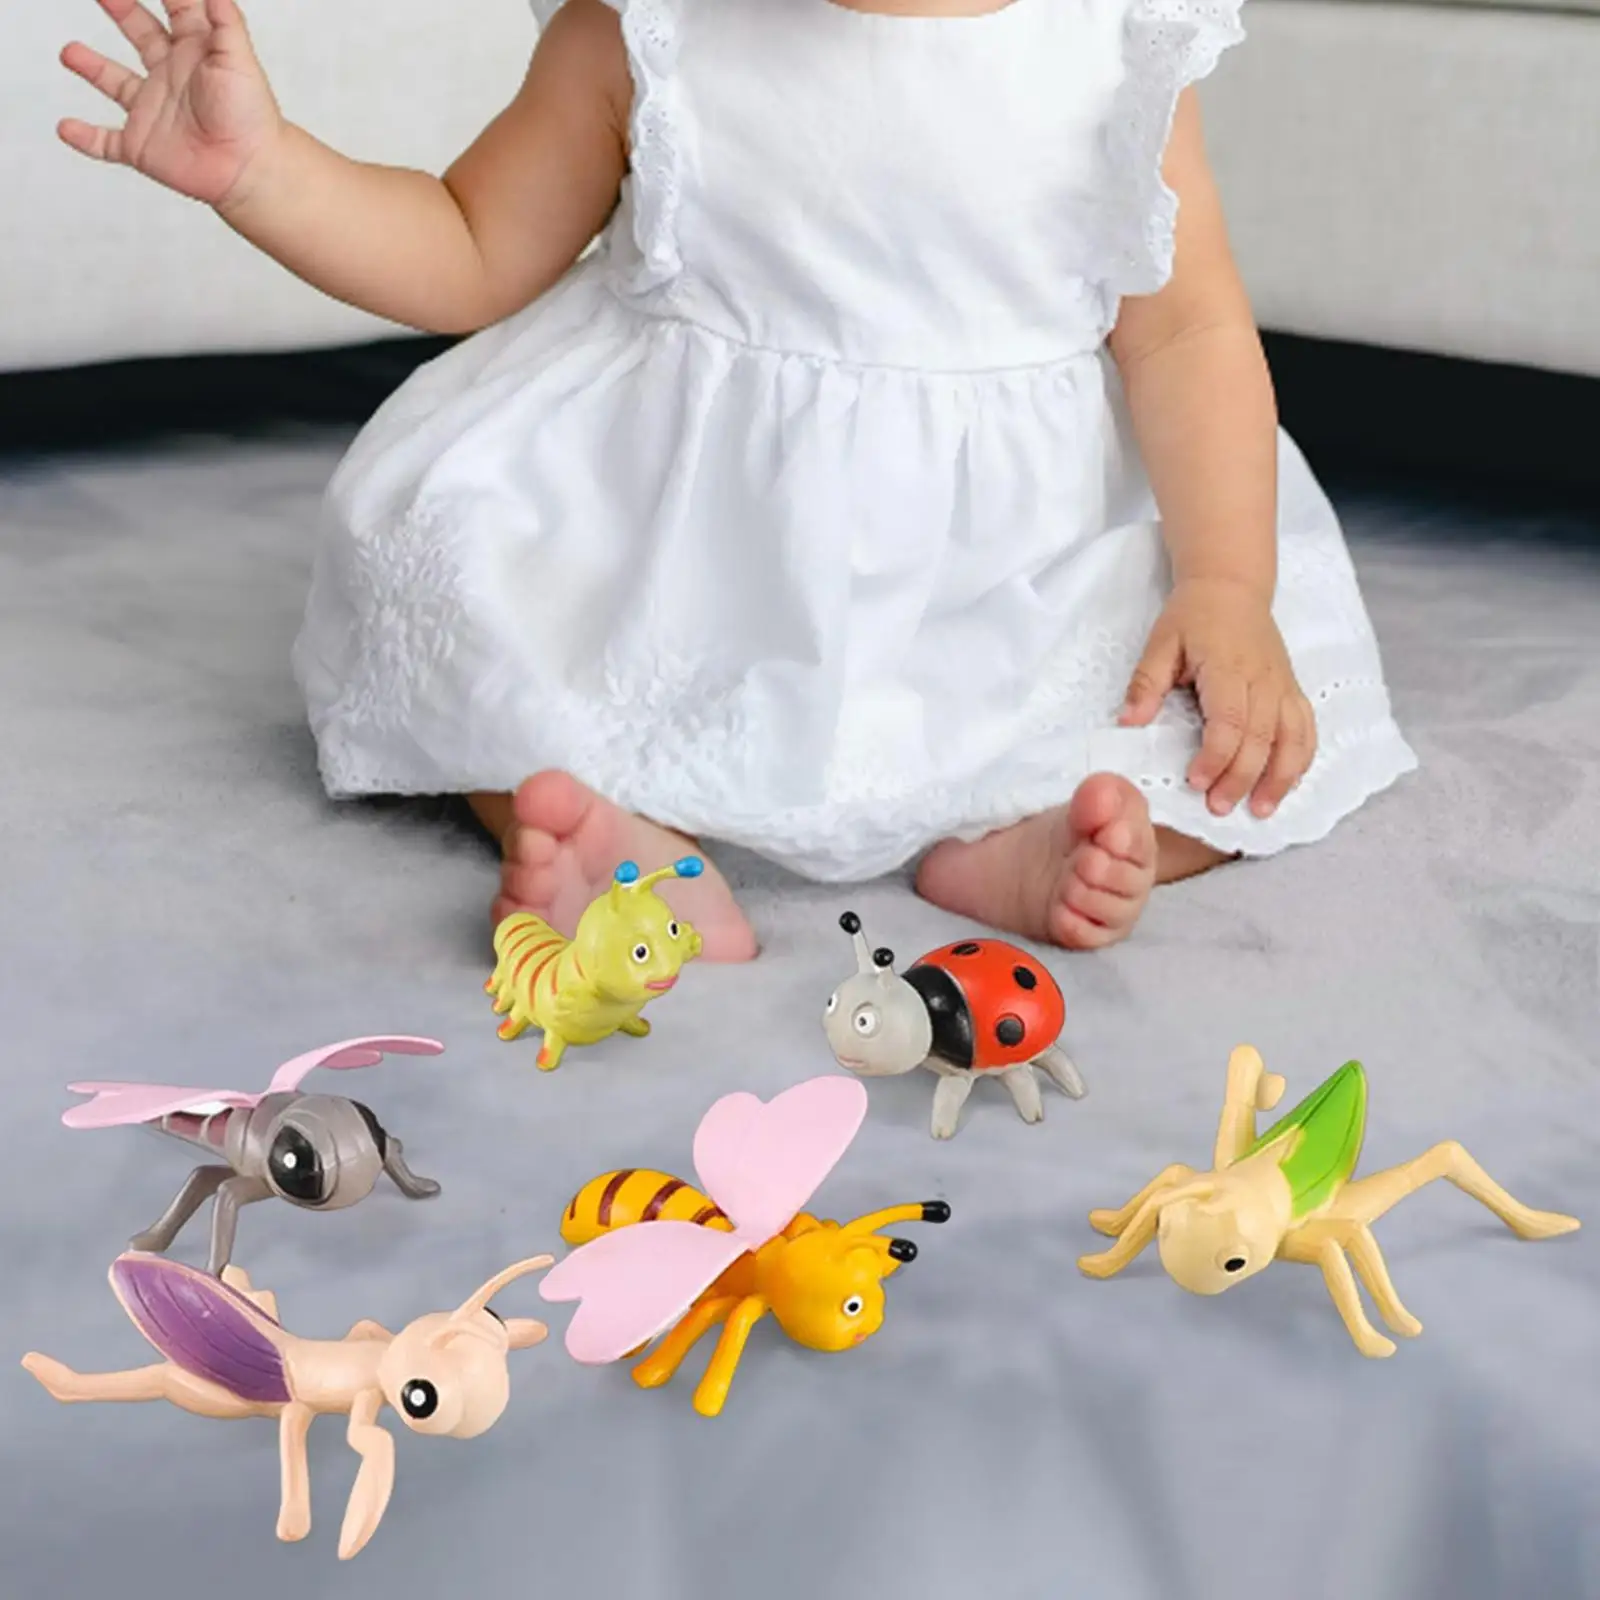 Set of 6 Count Artifical Animal Model Toy for Toddler Simulation Accessory